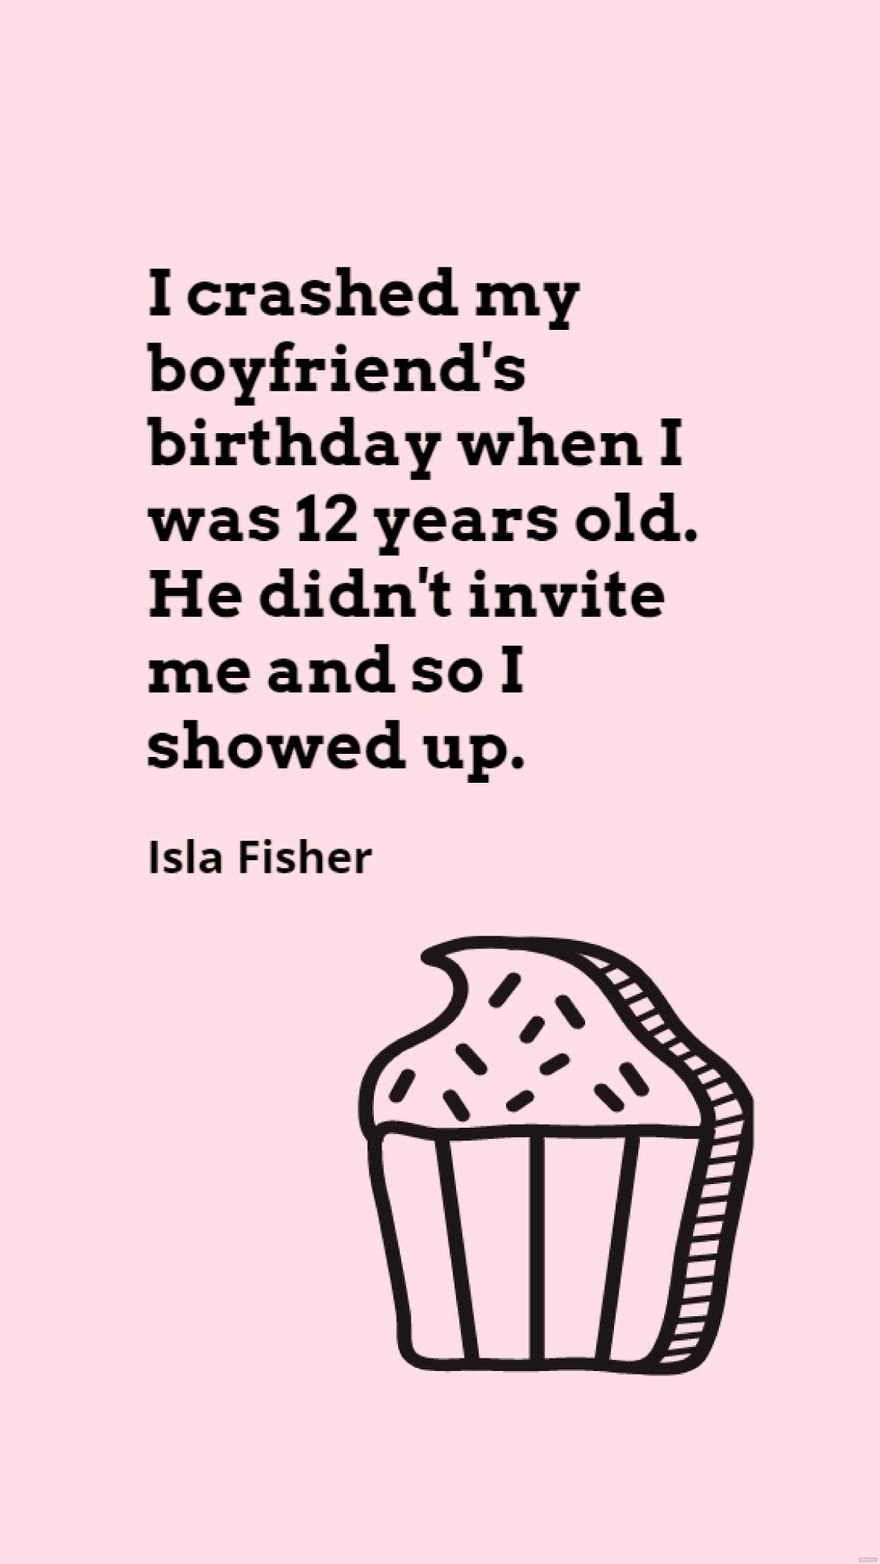 Isla Fisher - I crashed my boyfriend's birthday when I was 12 years old. He didn't invite me and so I showed up.